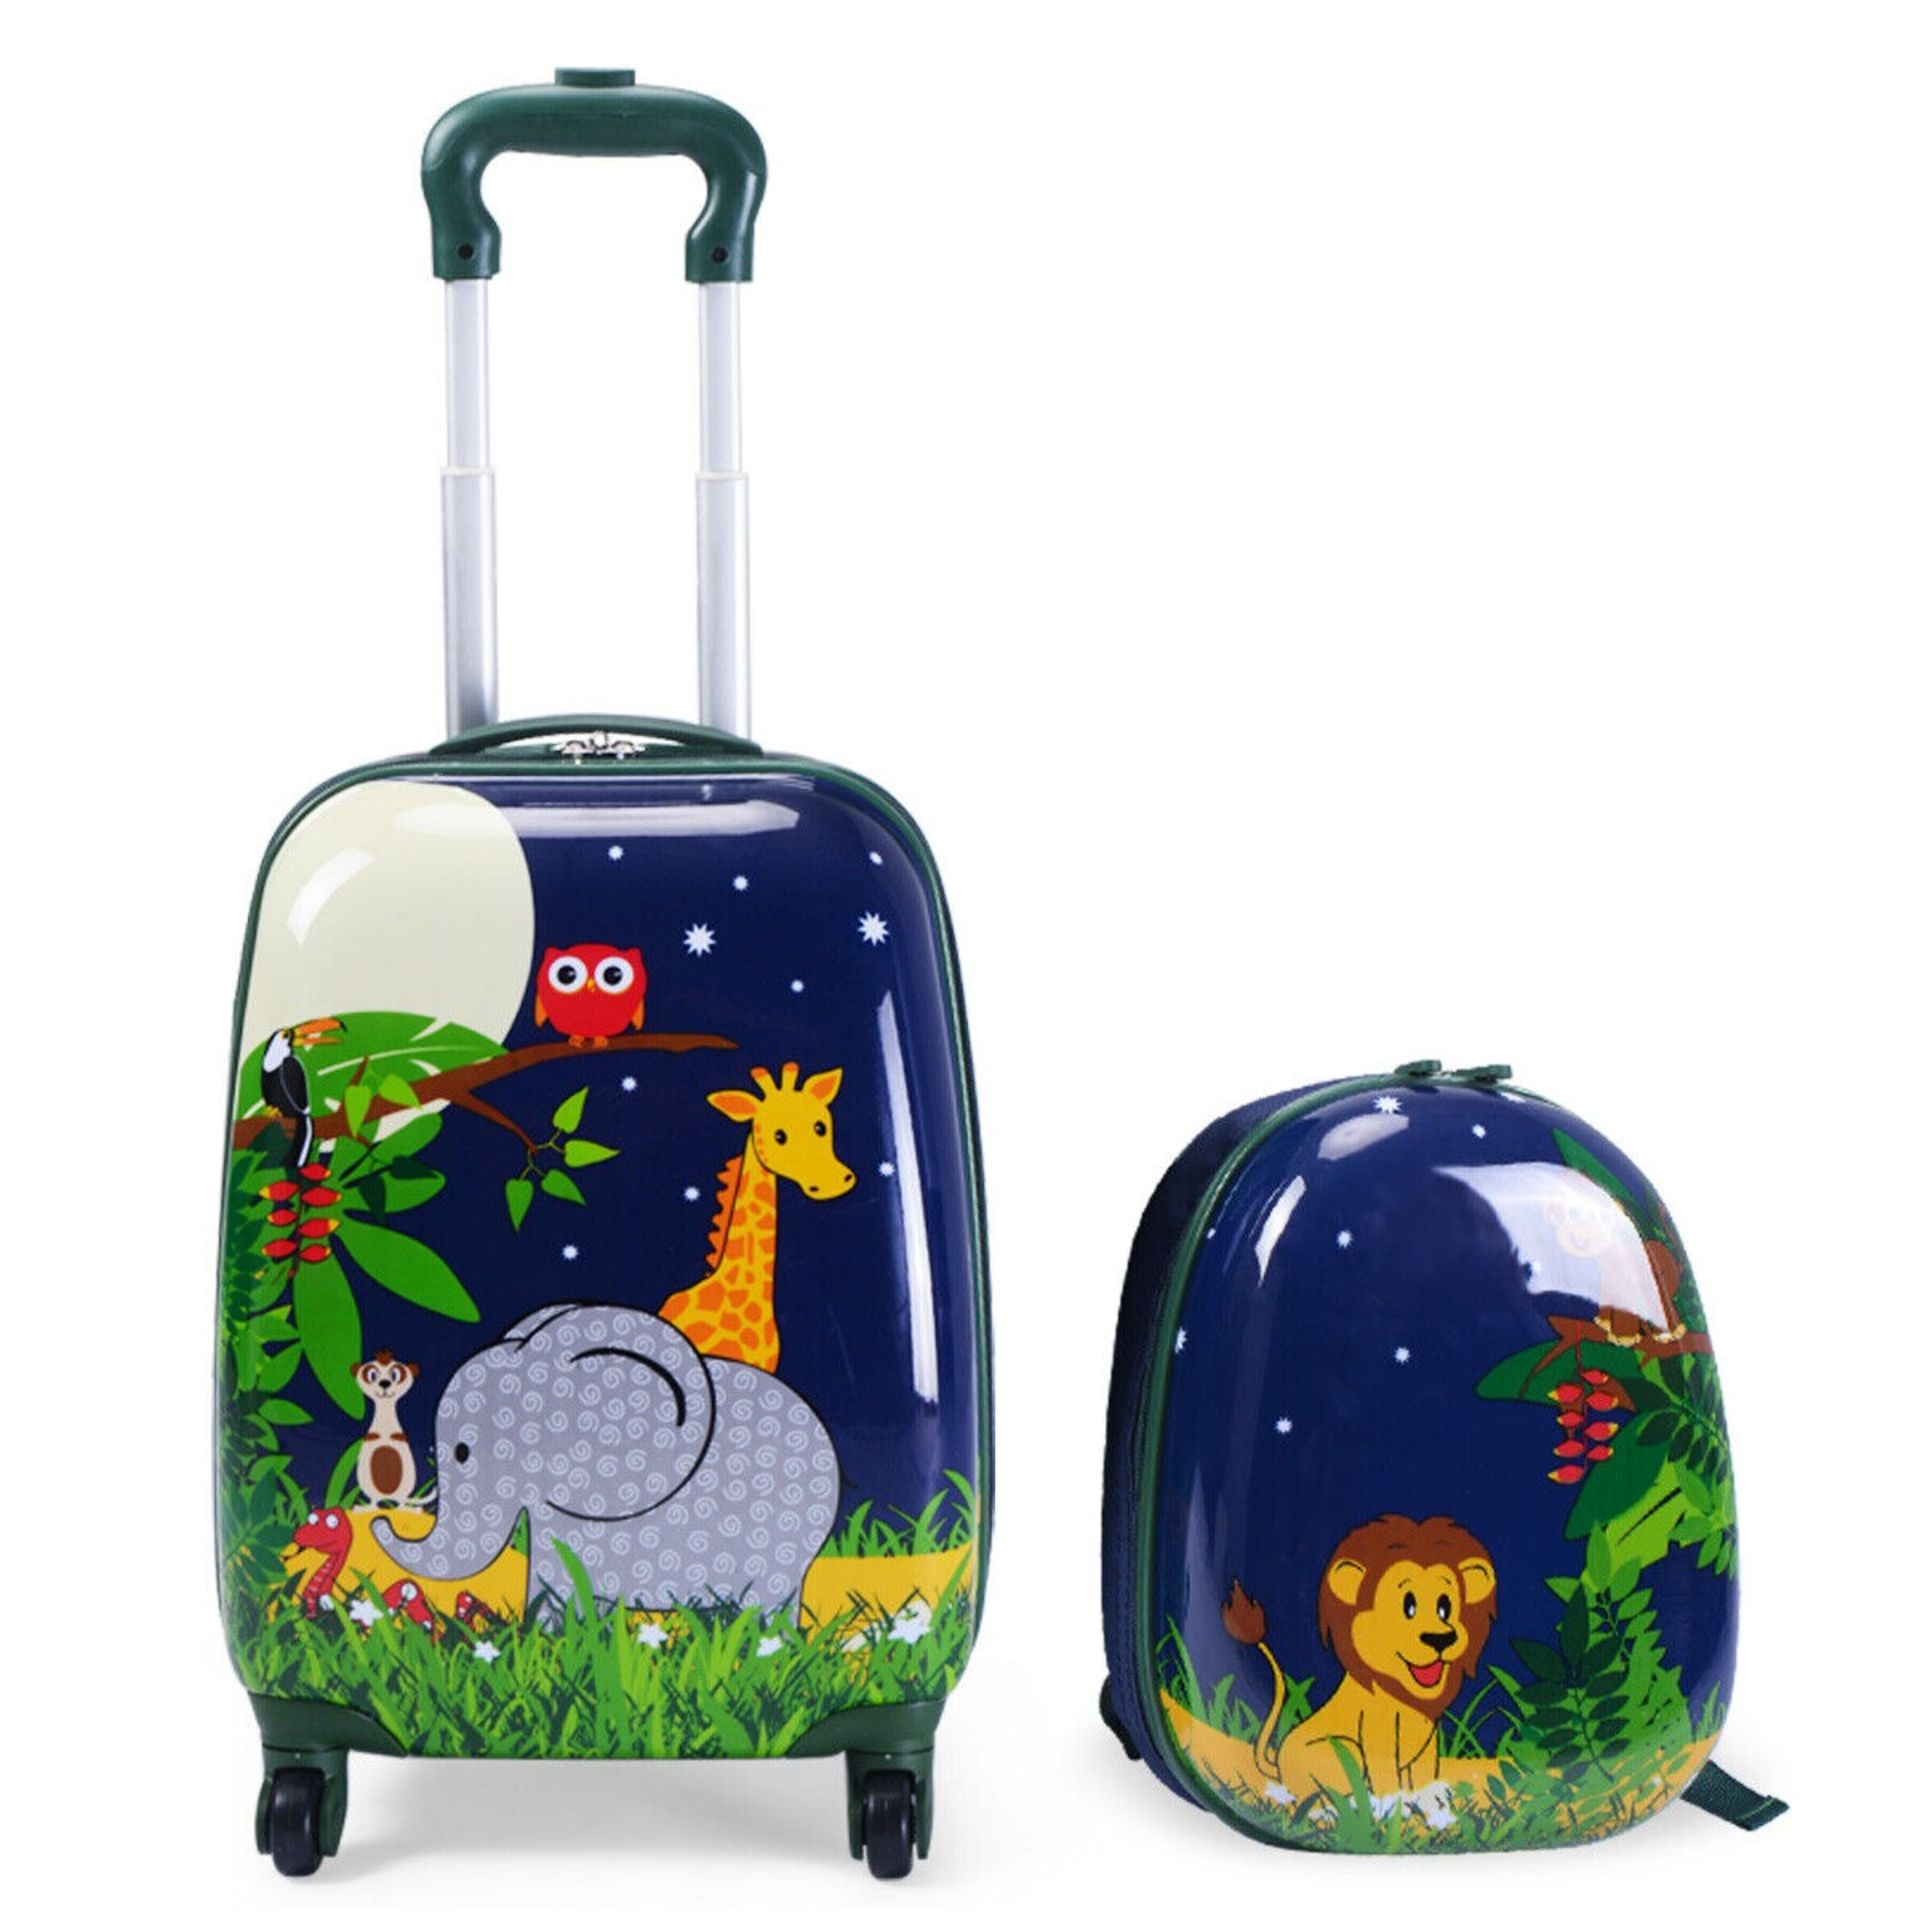 2Pc 12" 16" Kids Luggage Set Suitcase Backpack School Travel Case ABS - ER53